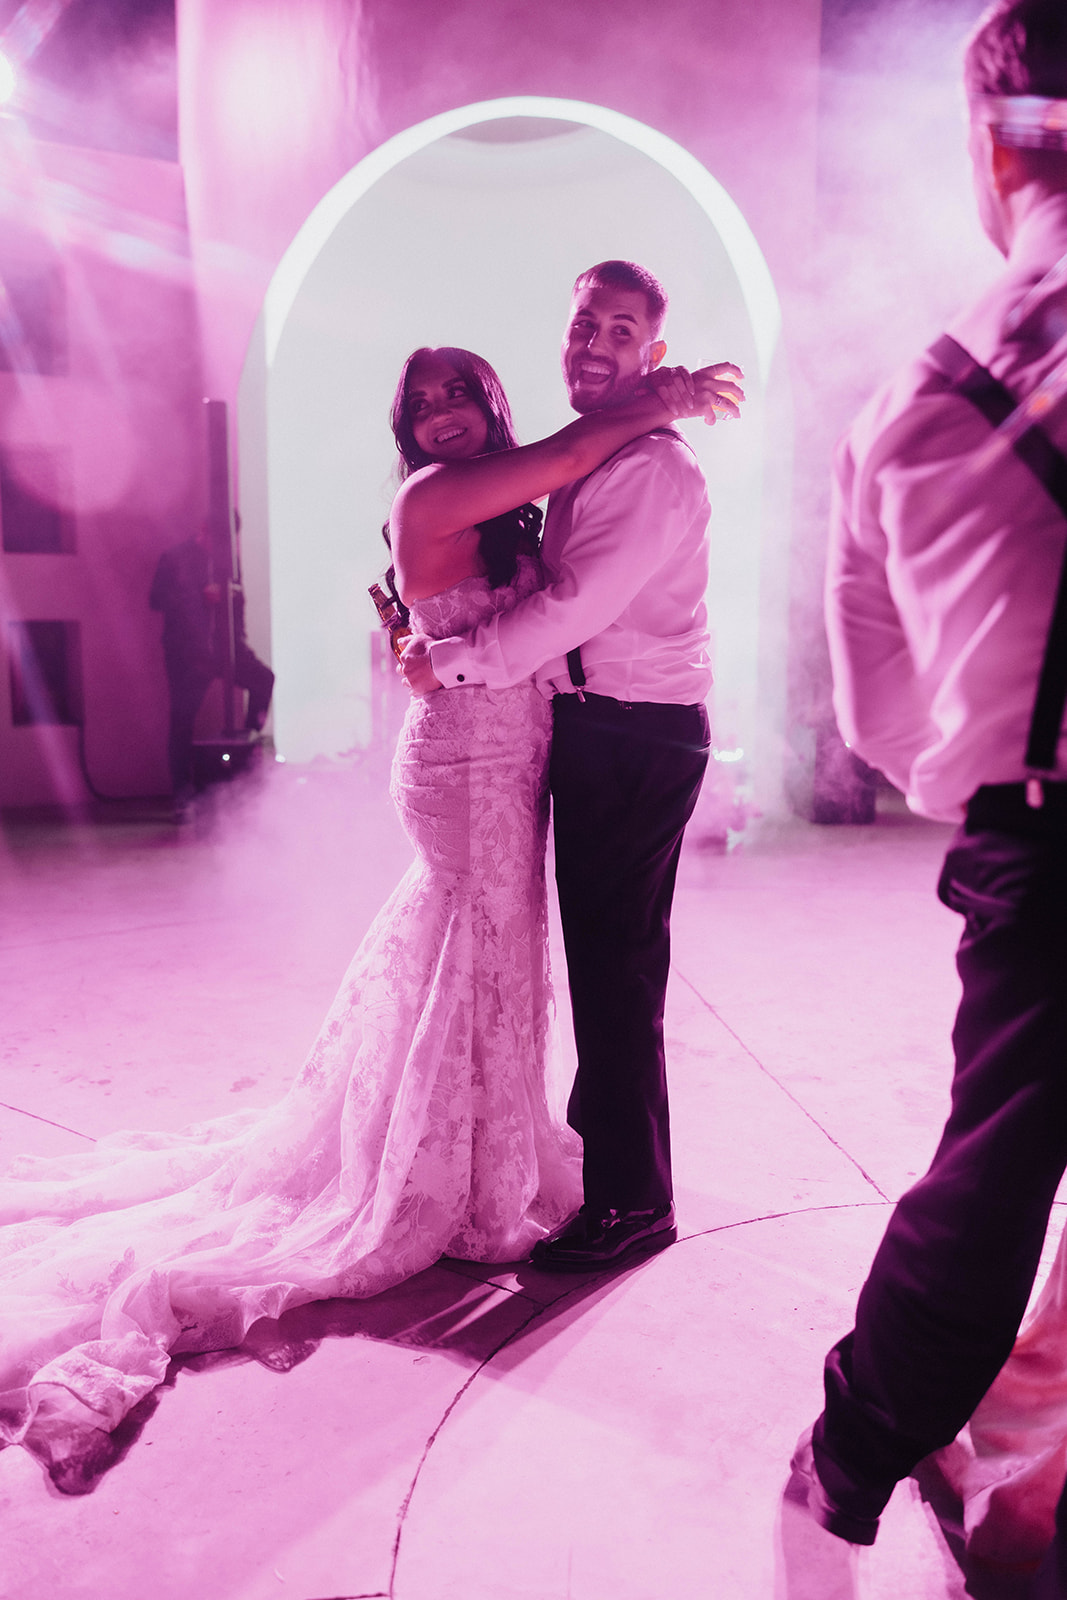 A couple sharing a dance at a wedding reception.